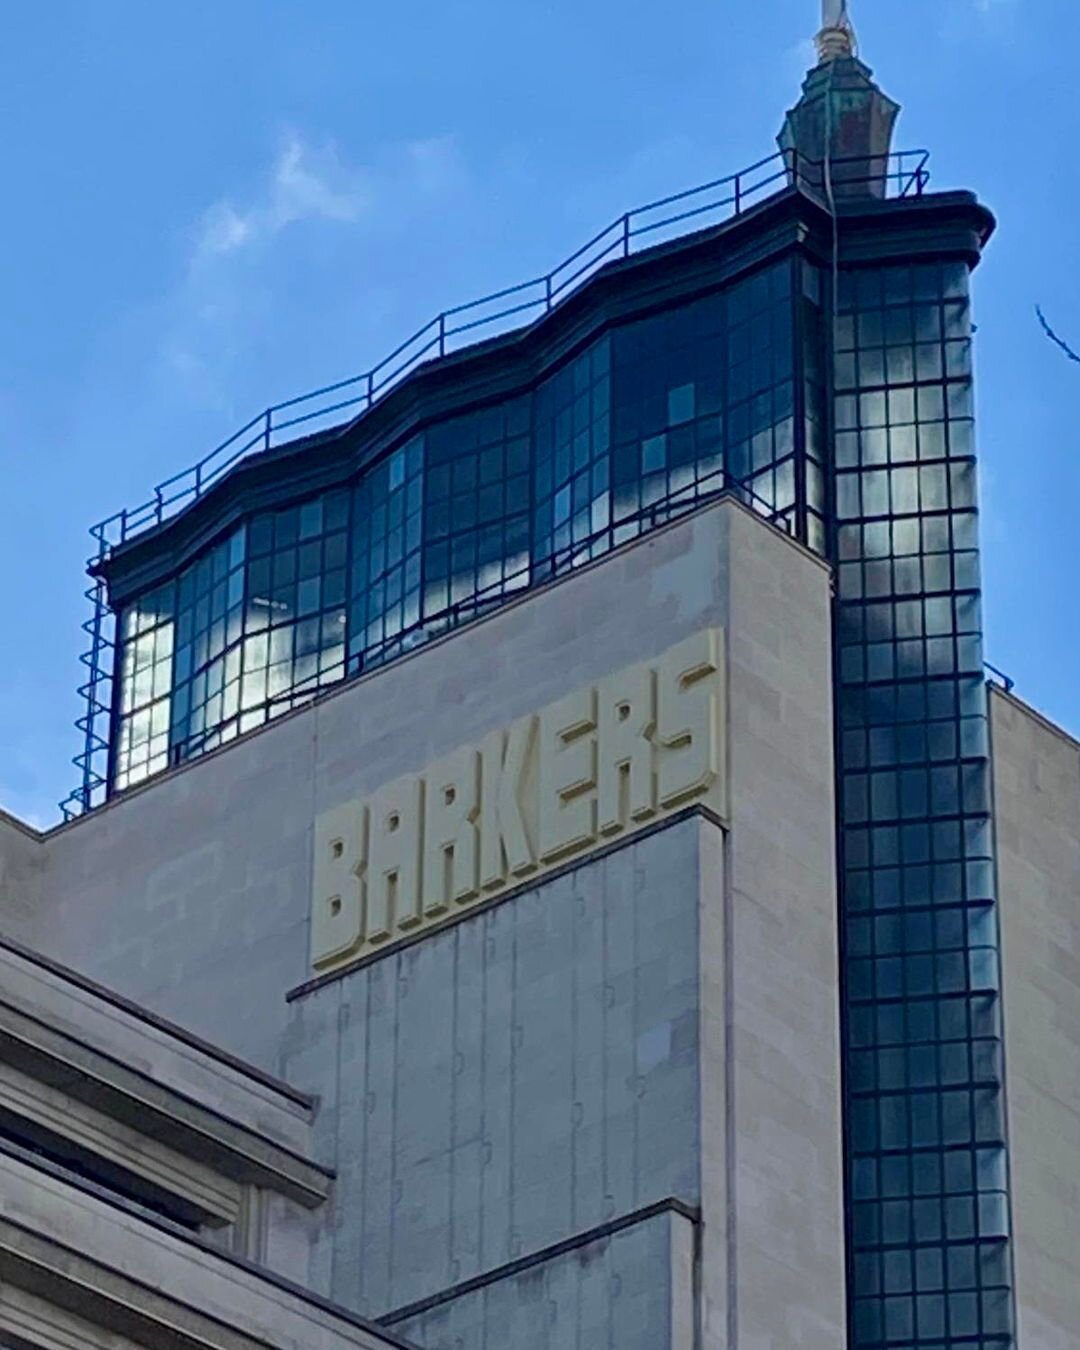 We&rsquo;ve said it before&hellip; always look up when you&rsquo;re in London! 

The Barkers building in High Street Ken, formerly the department store, Barkers of Kensington, started life as a drapery business, John Barker &amp; Company. It was orig